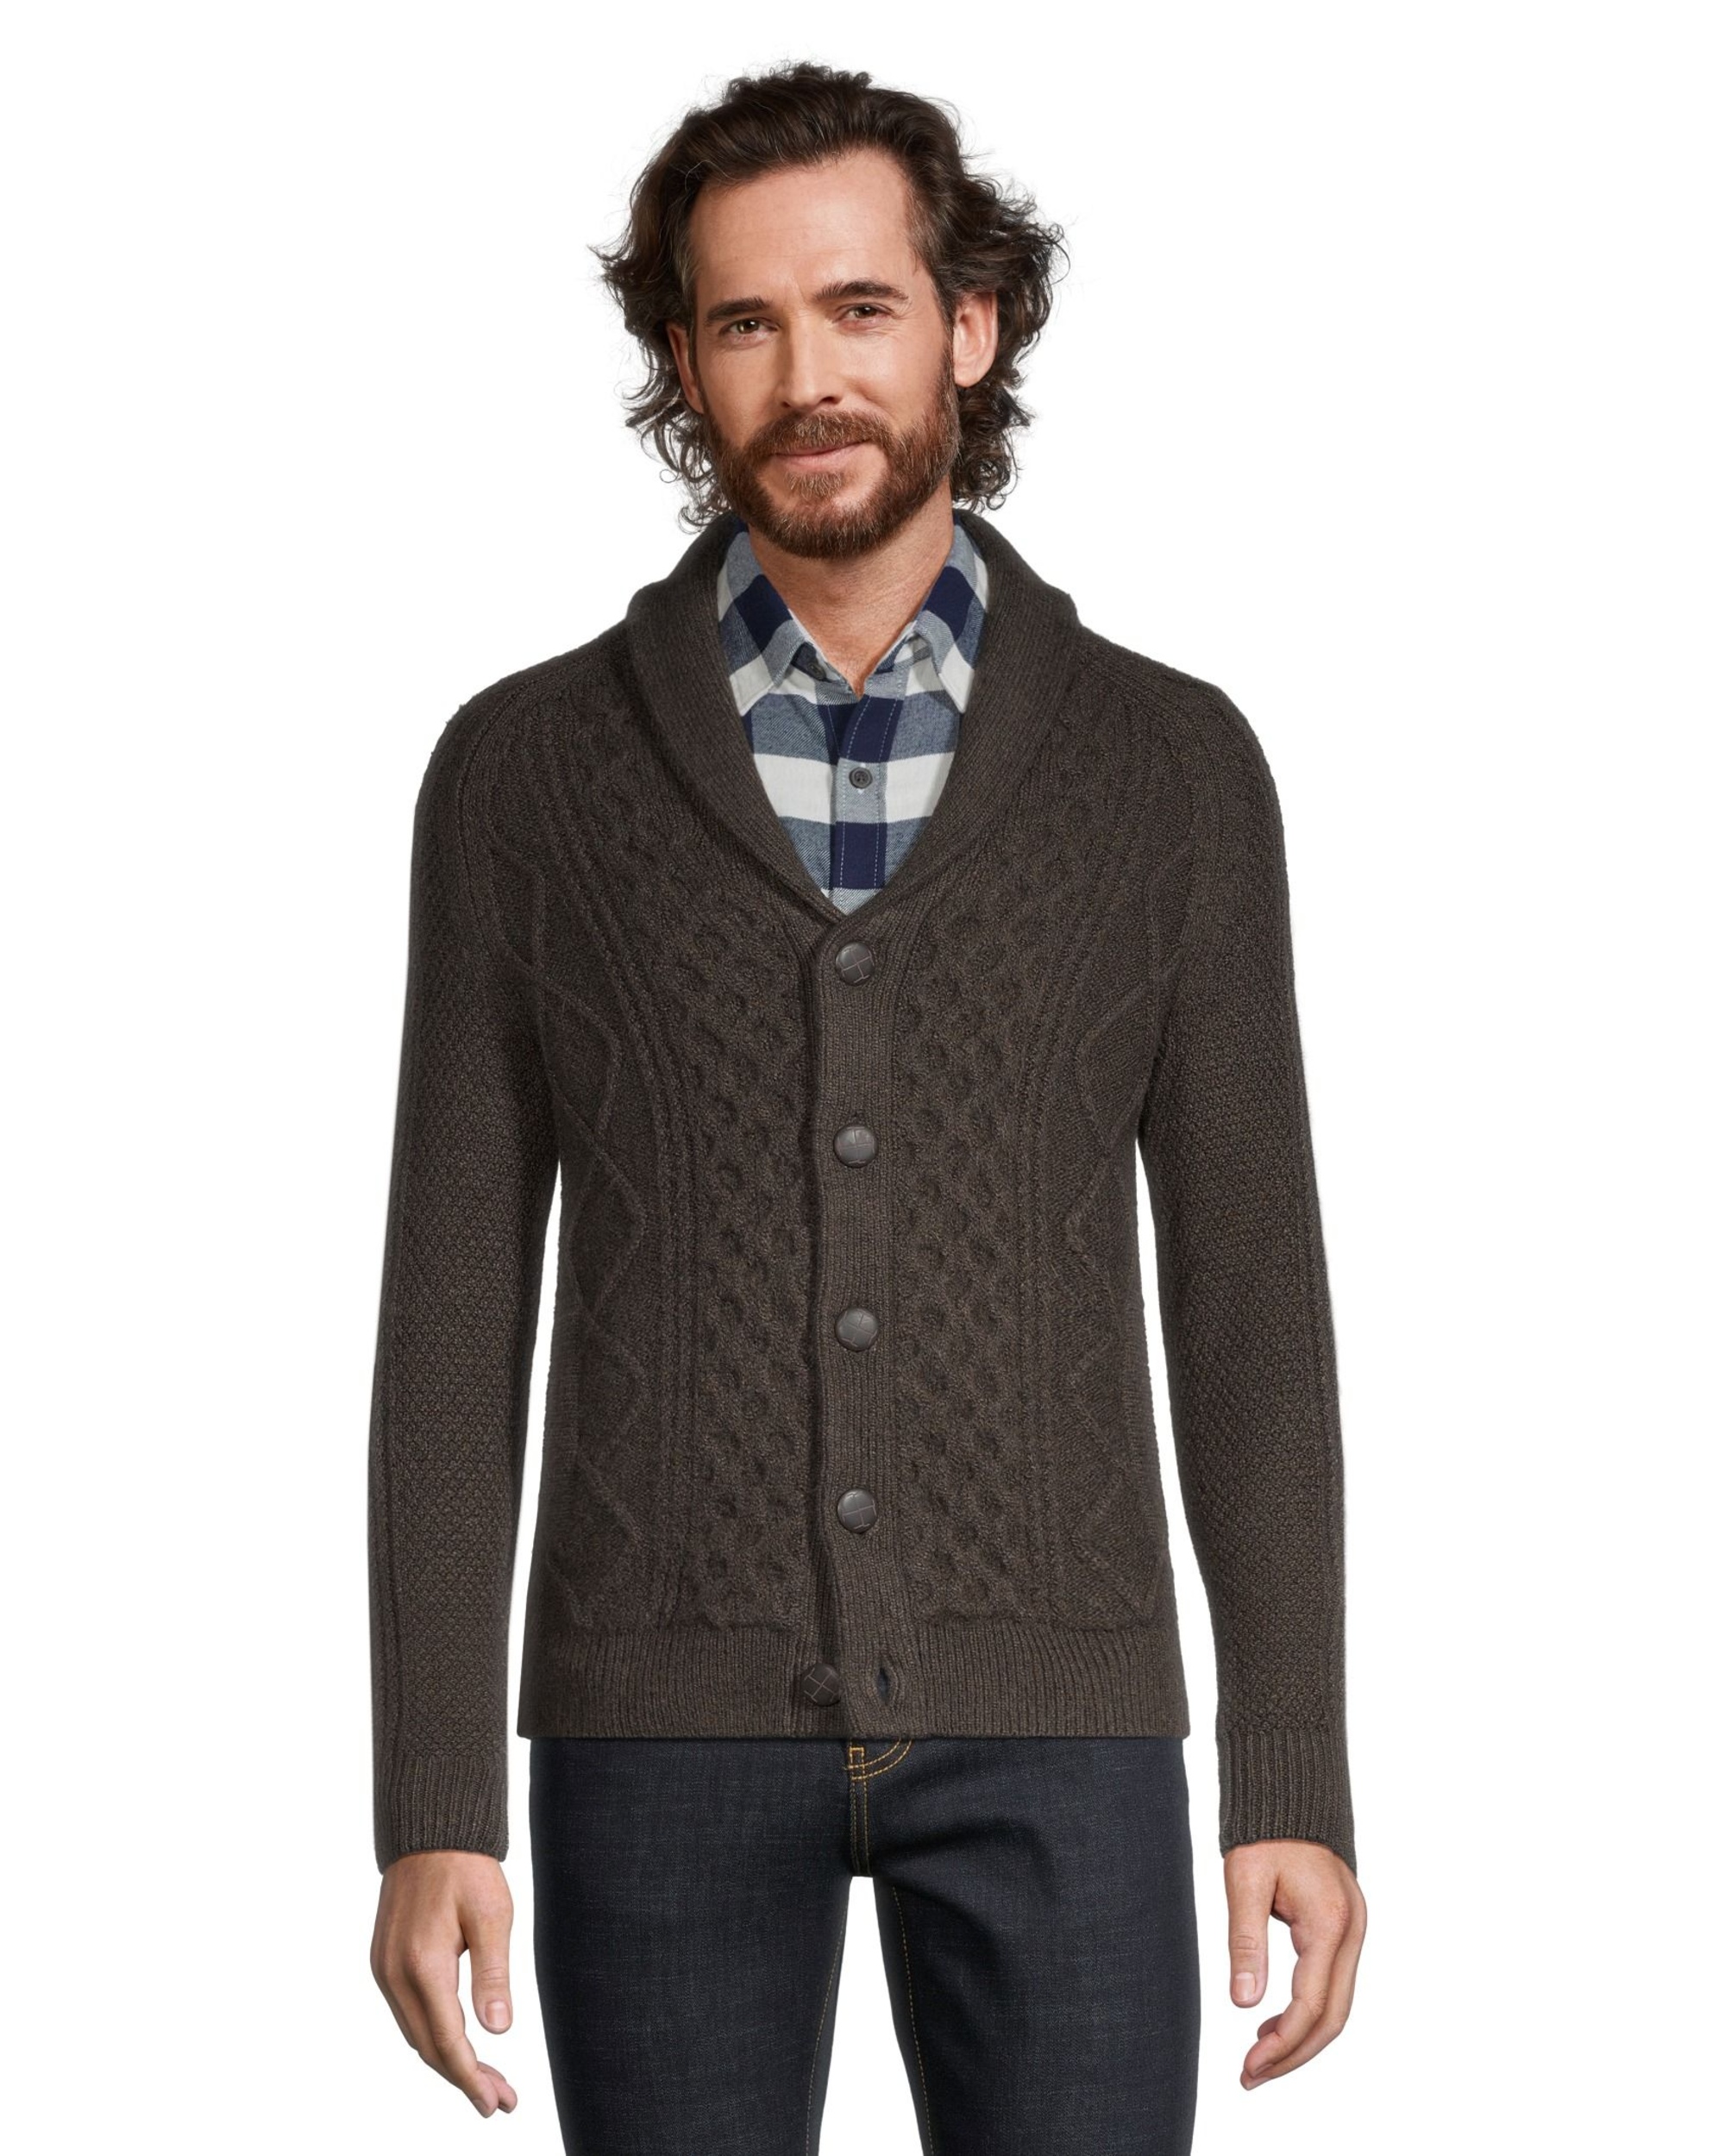 Windriver Men's Heritage Button Down Shawl Cardigan Sweater | Marks